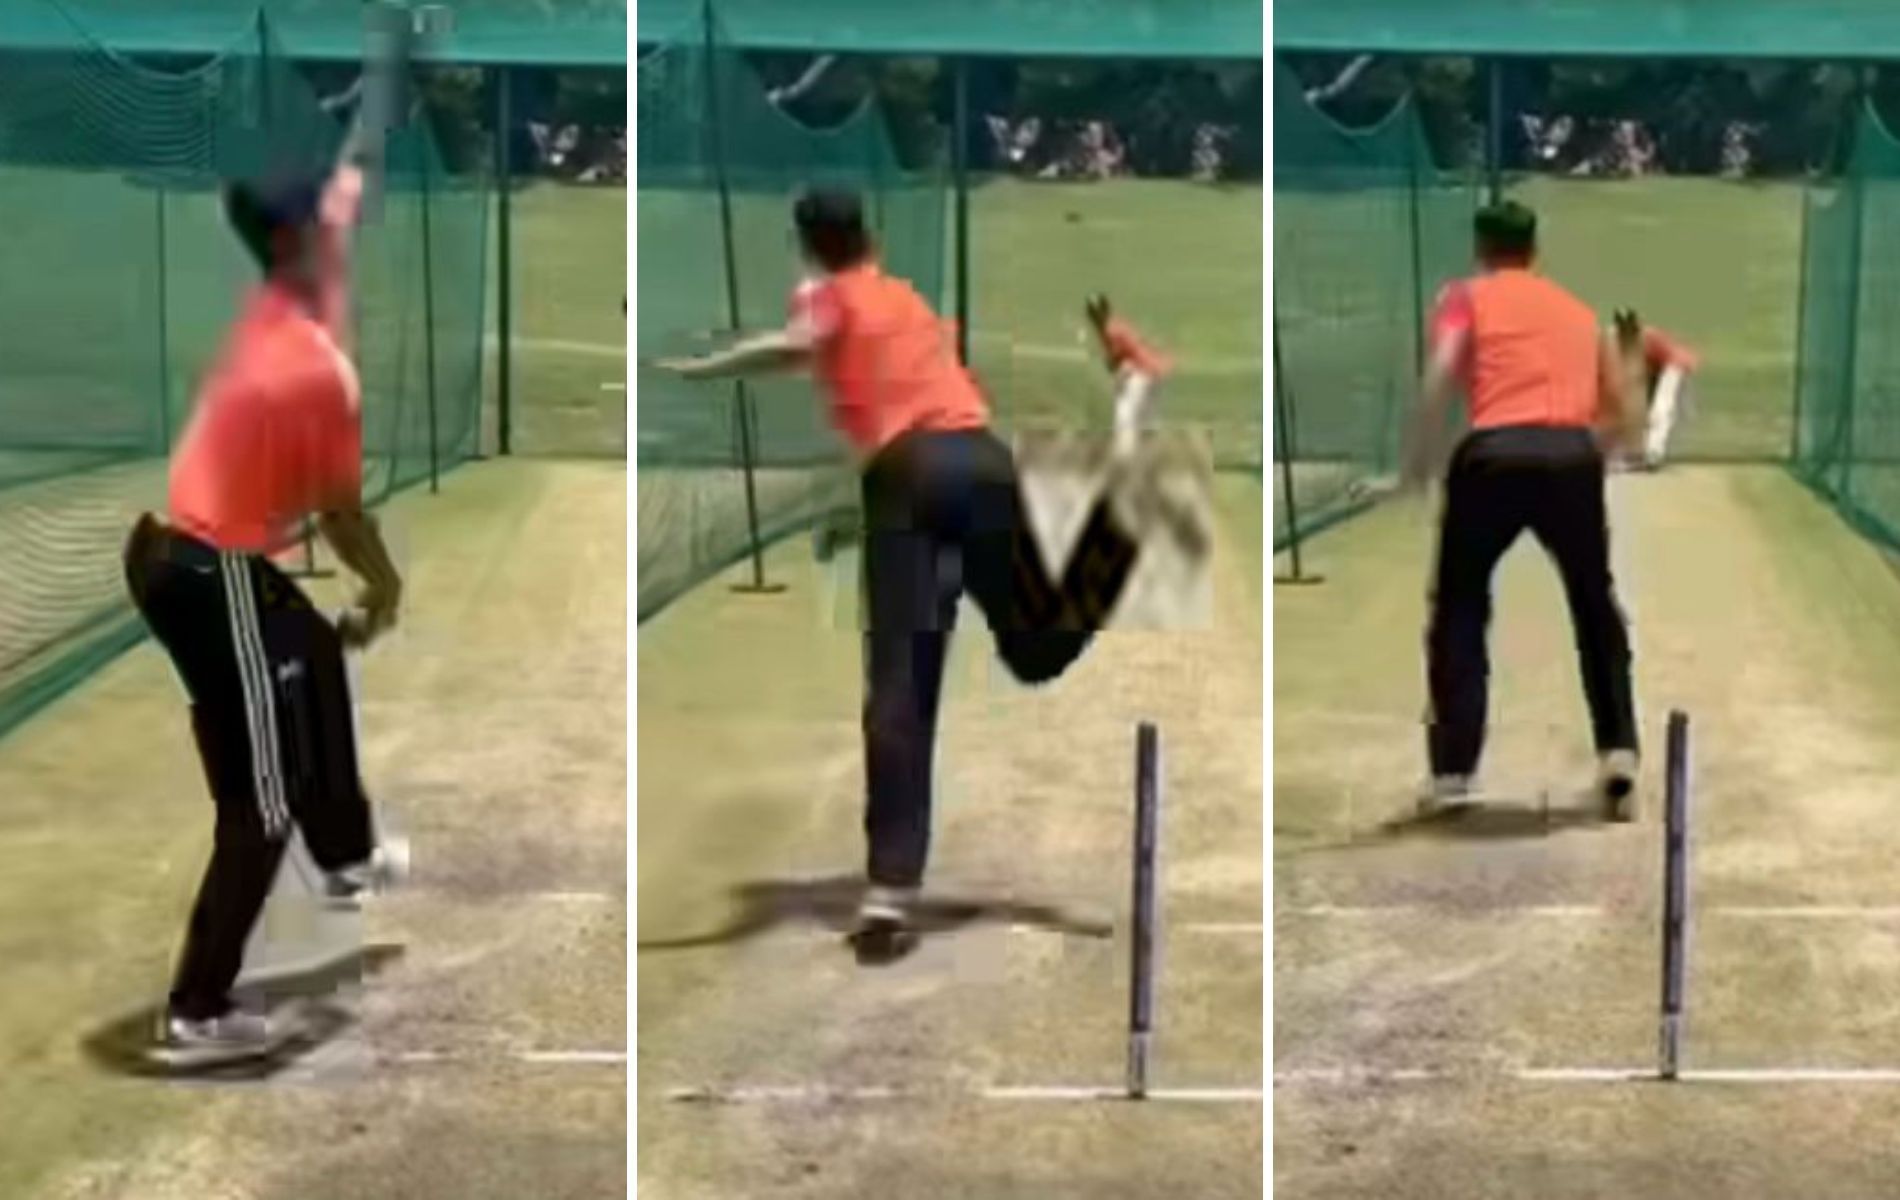 Yashasvi Jaiswal bowling in the nets. (Pics: Instagram)